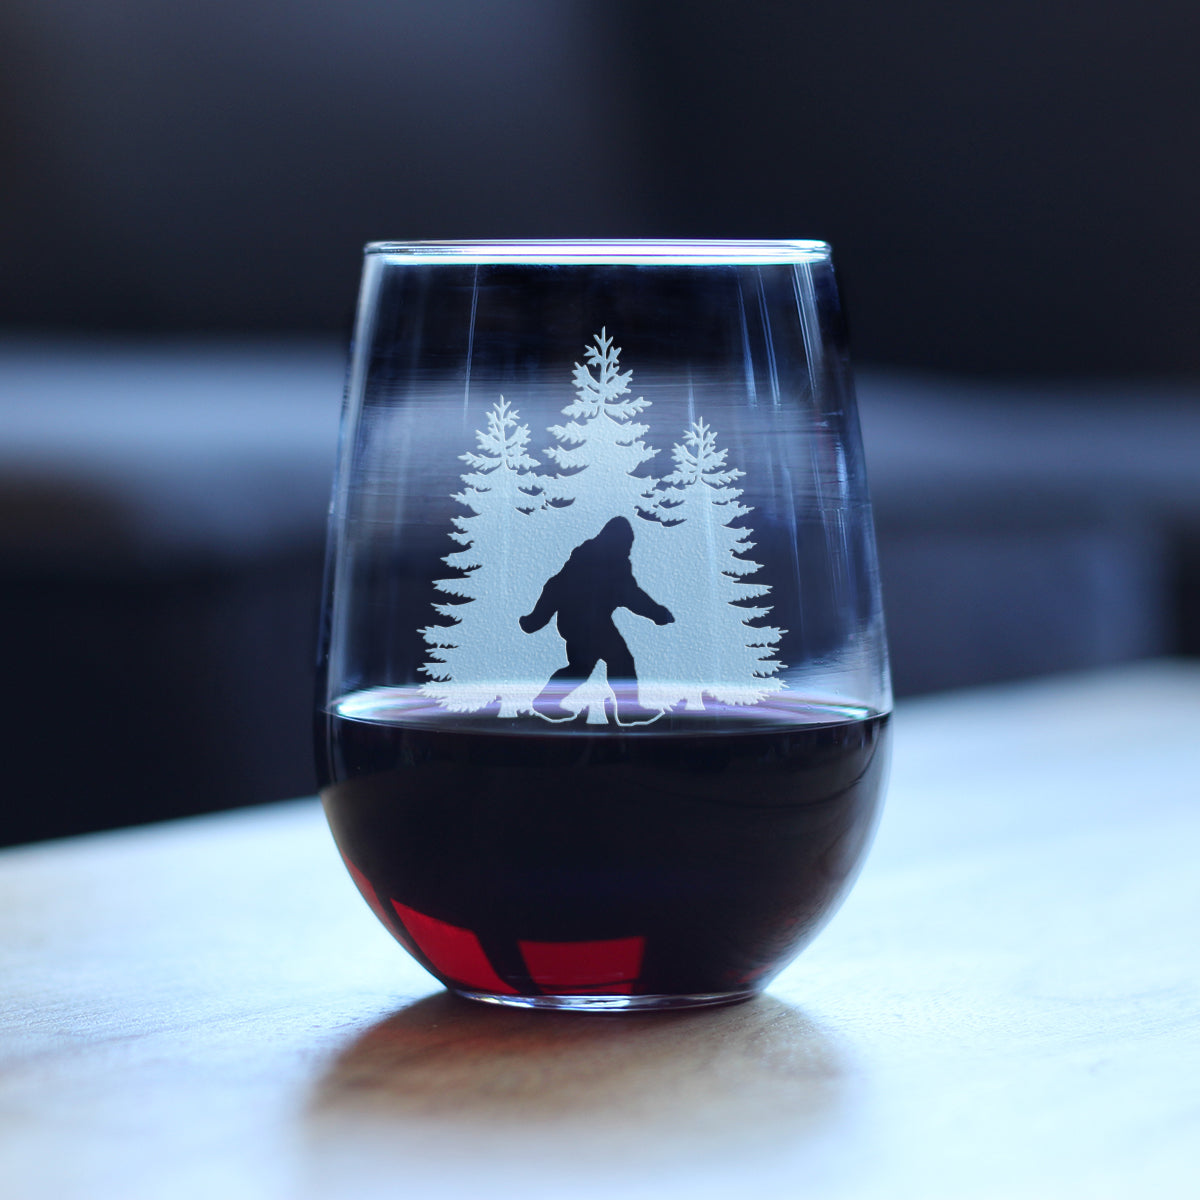 Bigfoot Engraved Stemless Wine Glass, Unique Sasquatch Themed Gifts, Funny Gift Idea for Outdoorsmen